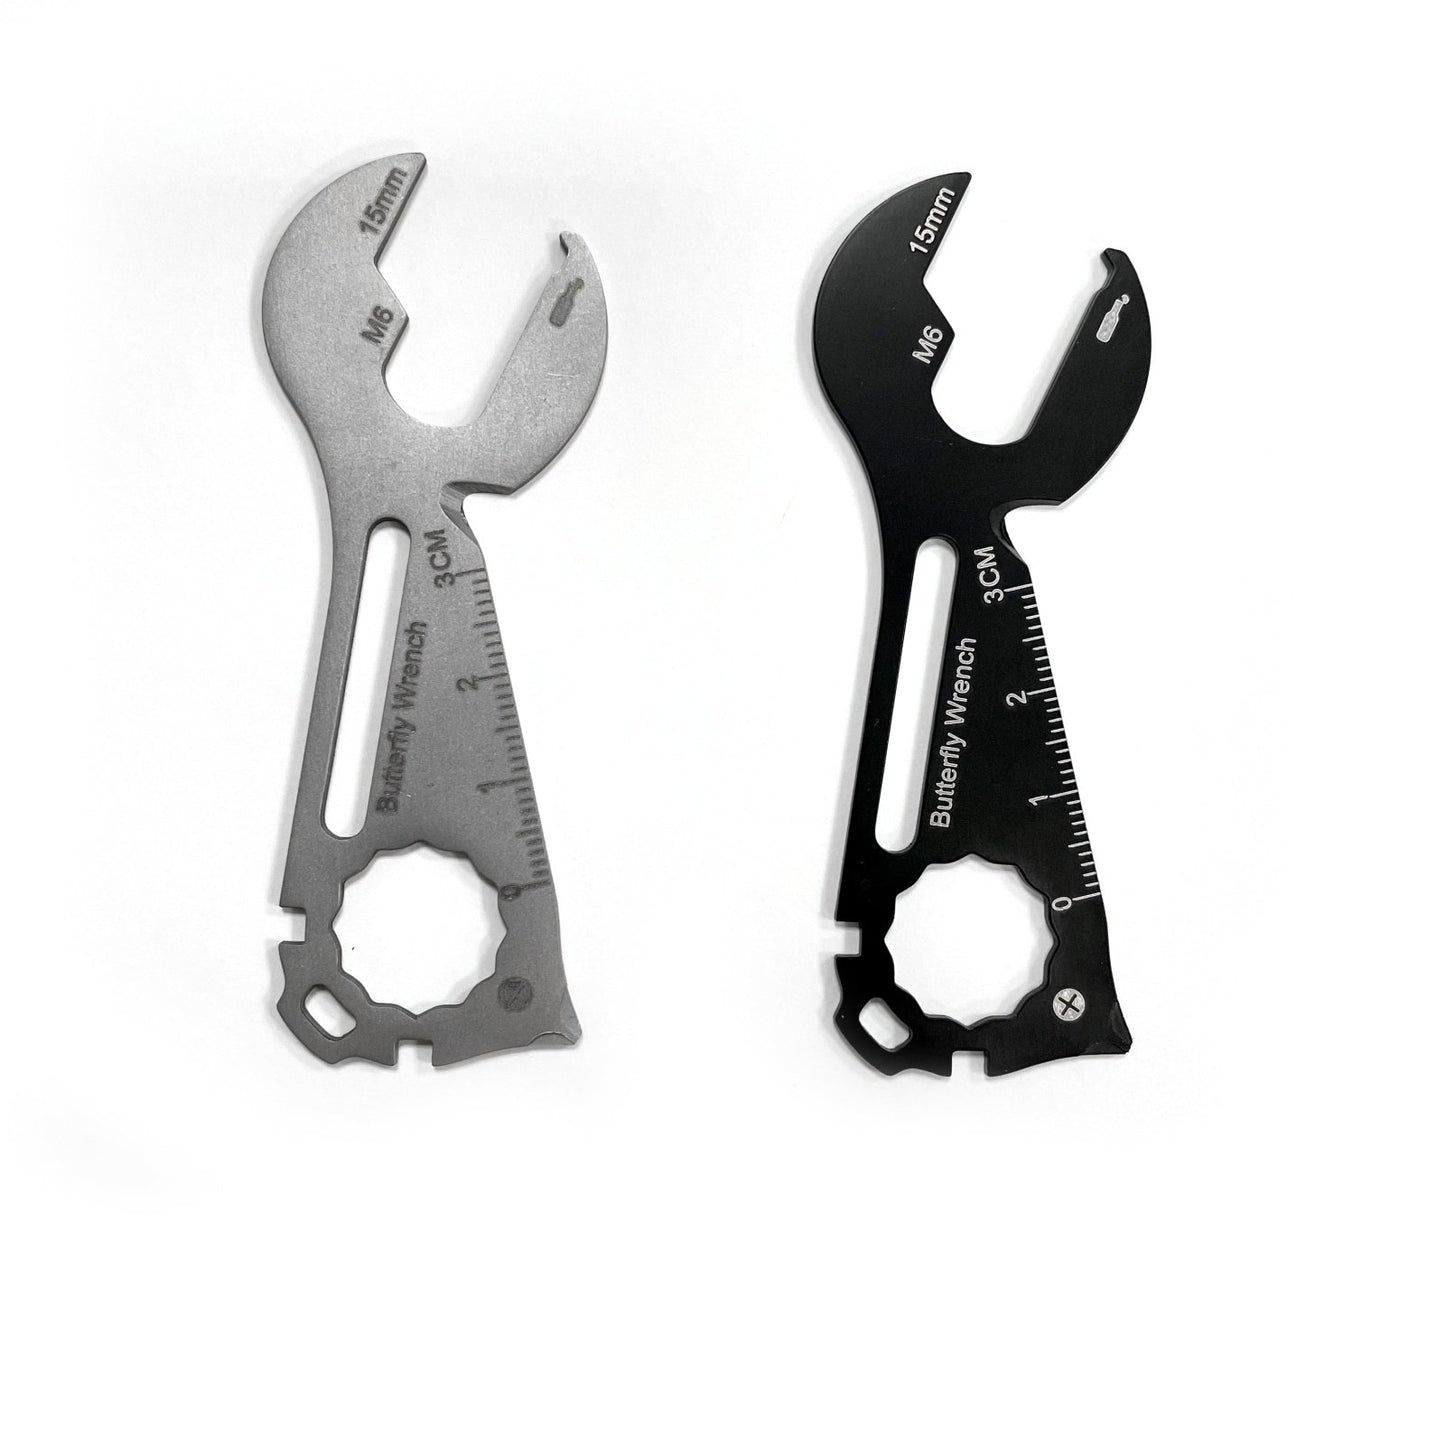 Our Other Custom Branded Card Tools - Custom Card Tools